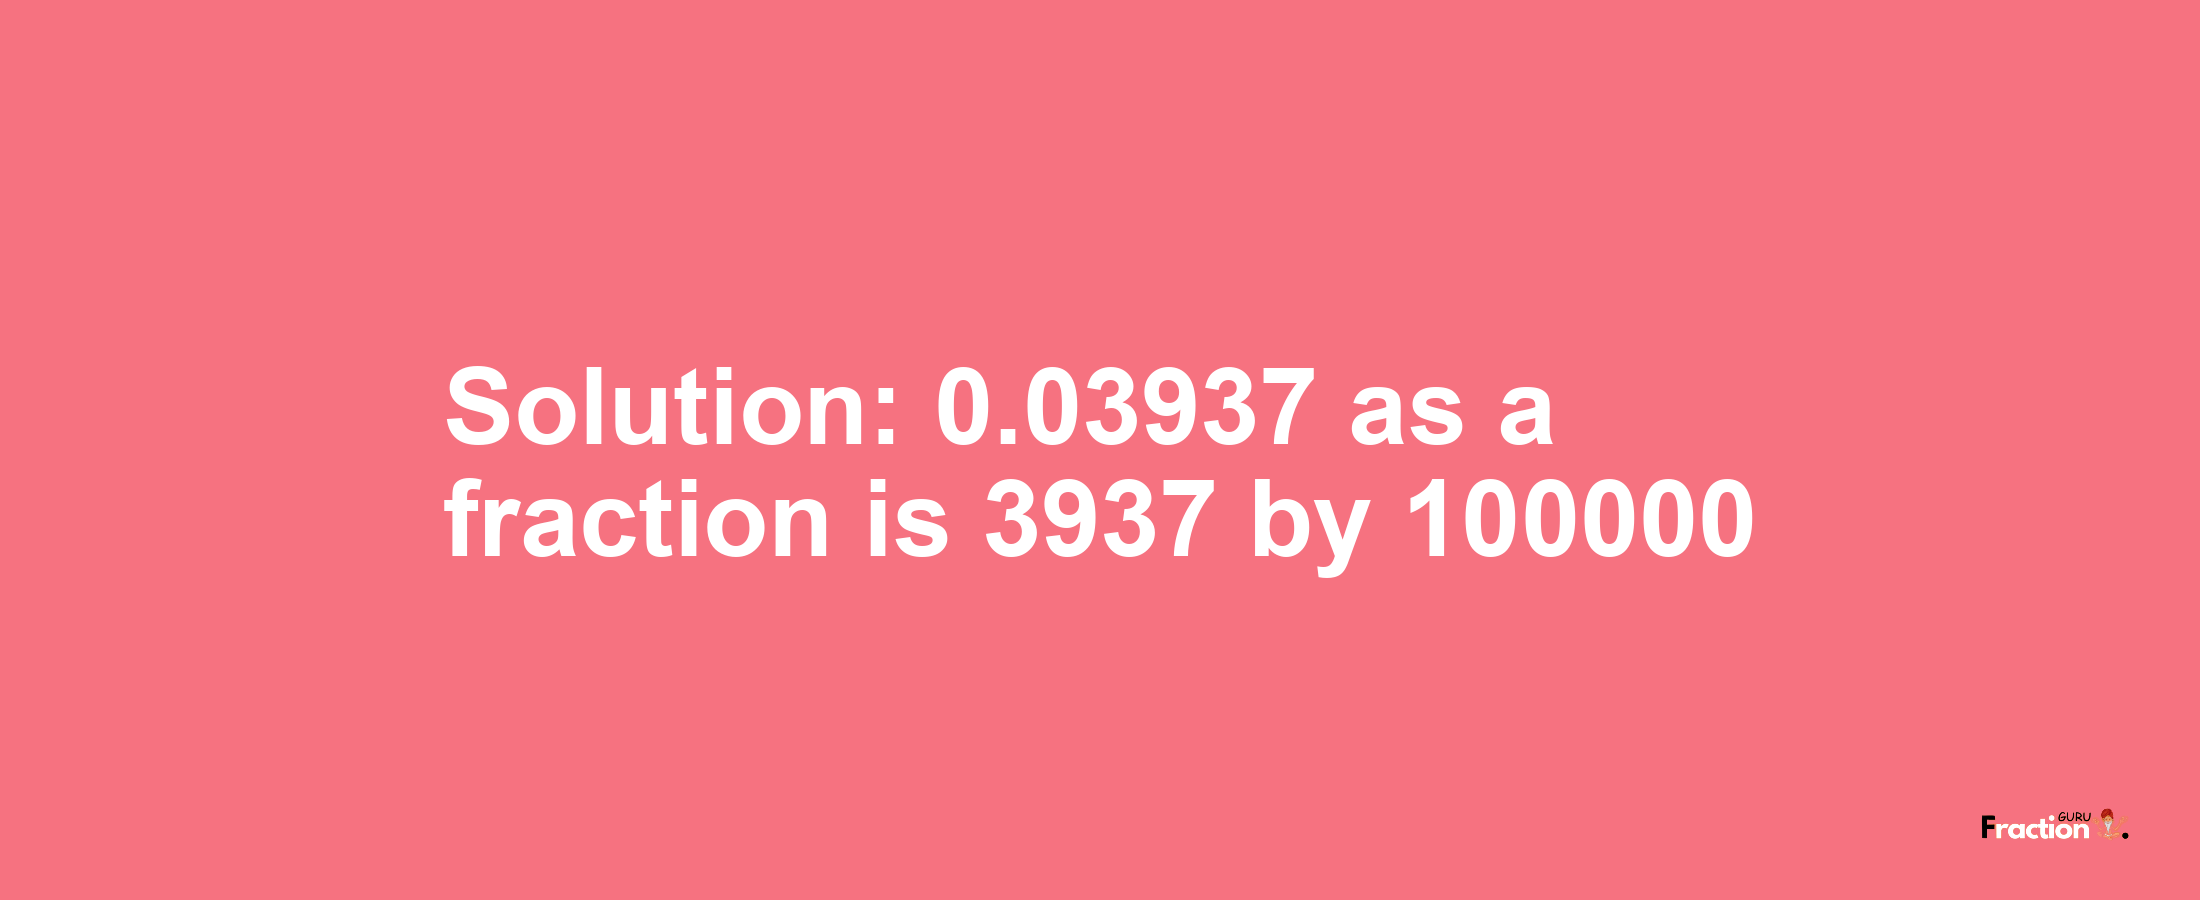 Solution:0.03937 as a fraction is 3937/100000